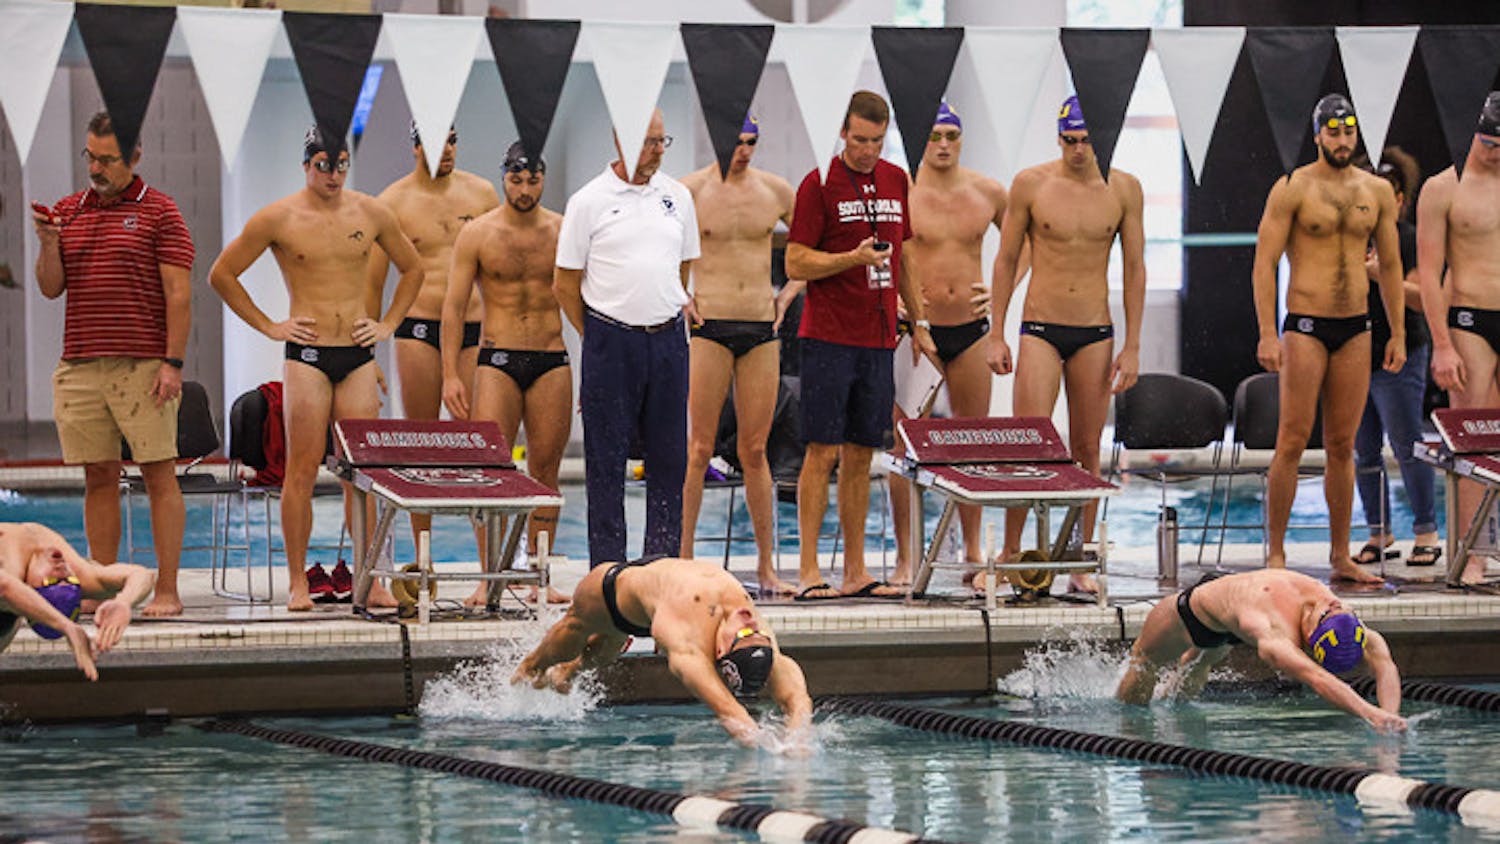 The South Carolina and LSU men's swim teams watch as the players kick off at the start of the 200-yard medley relay event on Oct. 8, 2022. The Gamecock men's swim team lost 143-157 to the Tigers.